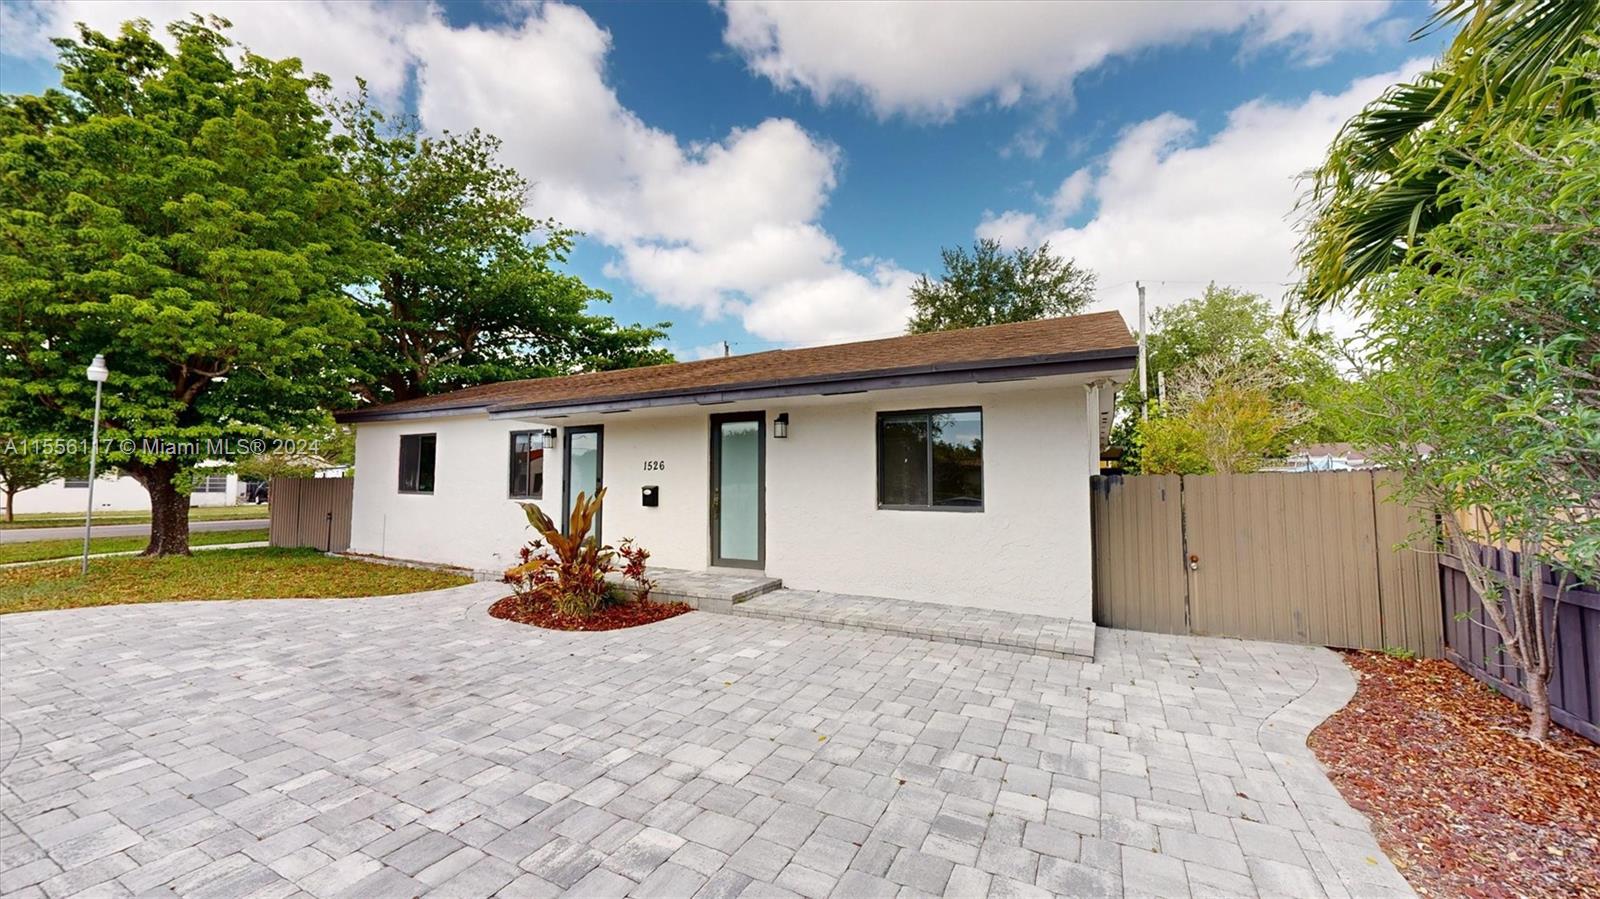 1526 SW 65th Ave, West Miami, Florida 33144, 3 Bedrooms Bedrooms, 1 Room Rooms,2 BathroomsBathrooms,Residential,For Sale,1526 SW 65th Ave,A11556117